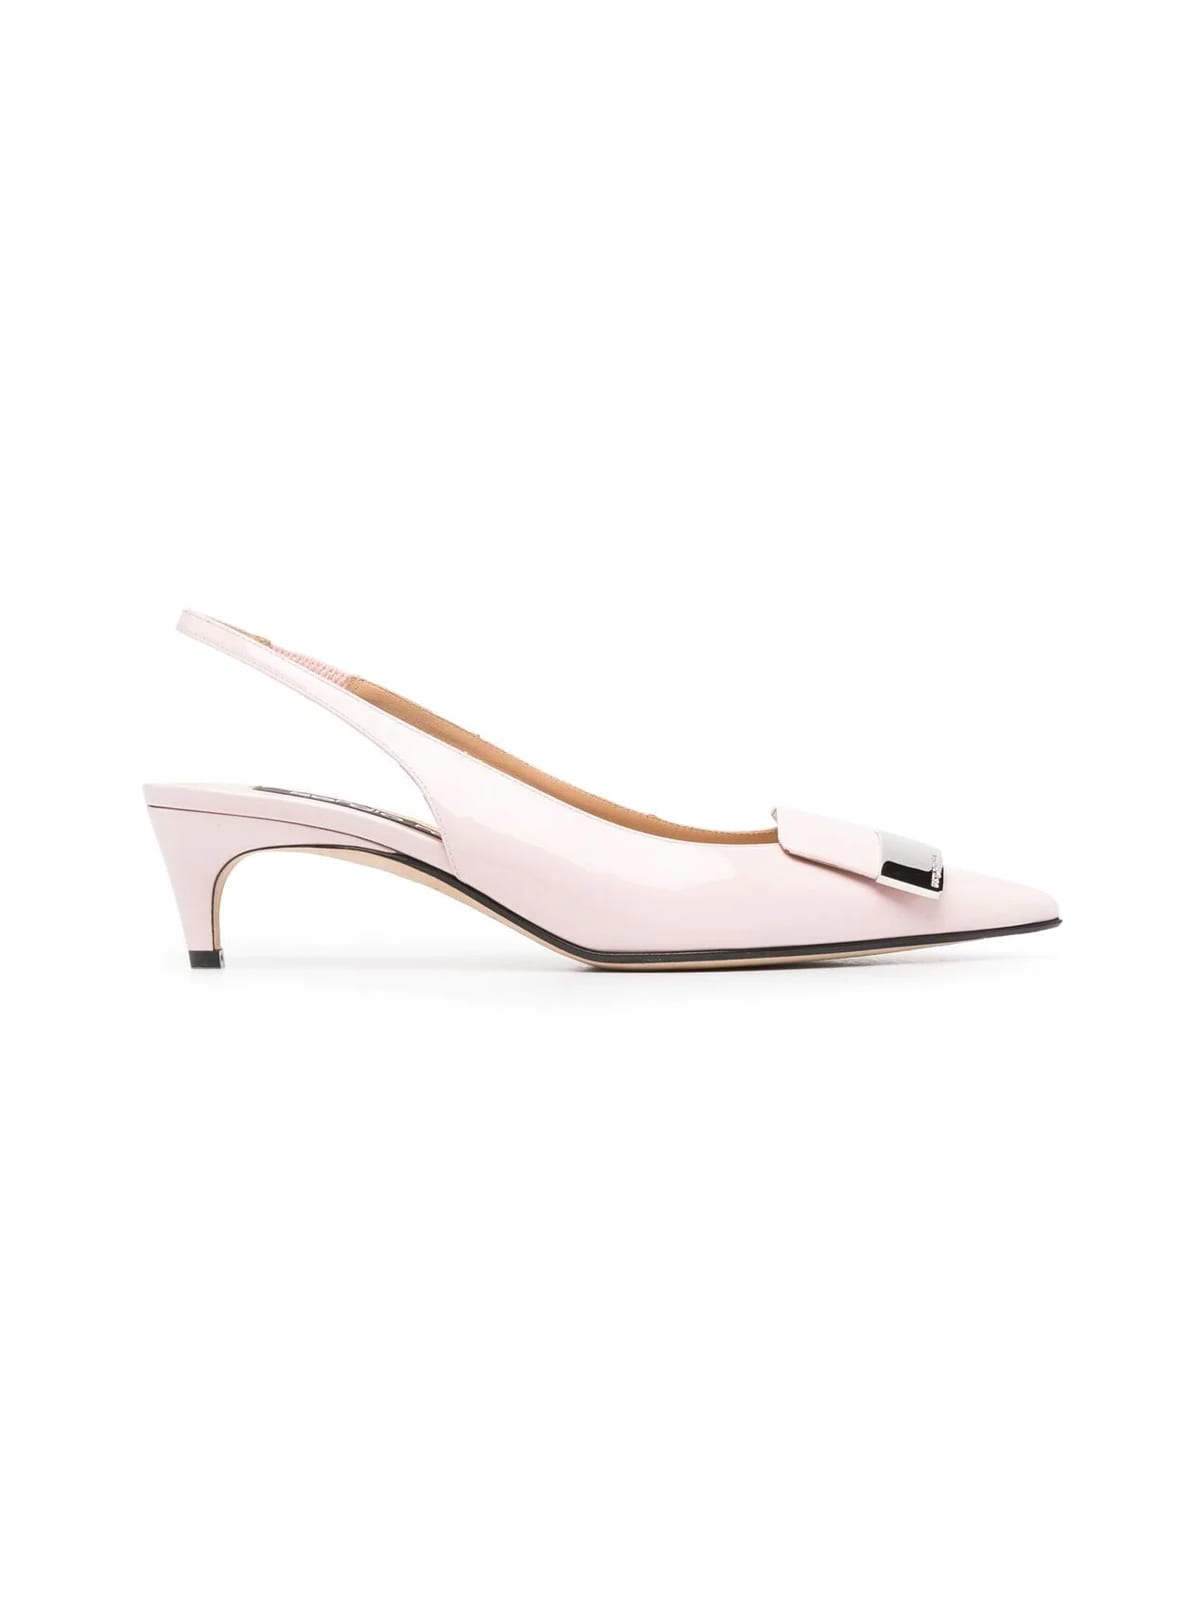 Buy Sergio Rossi Slingback Sandal online, shop Sergio Rossi shoes with free shipping